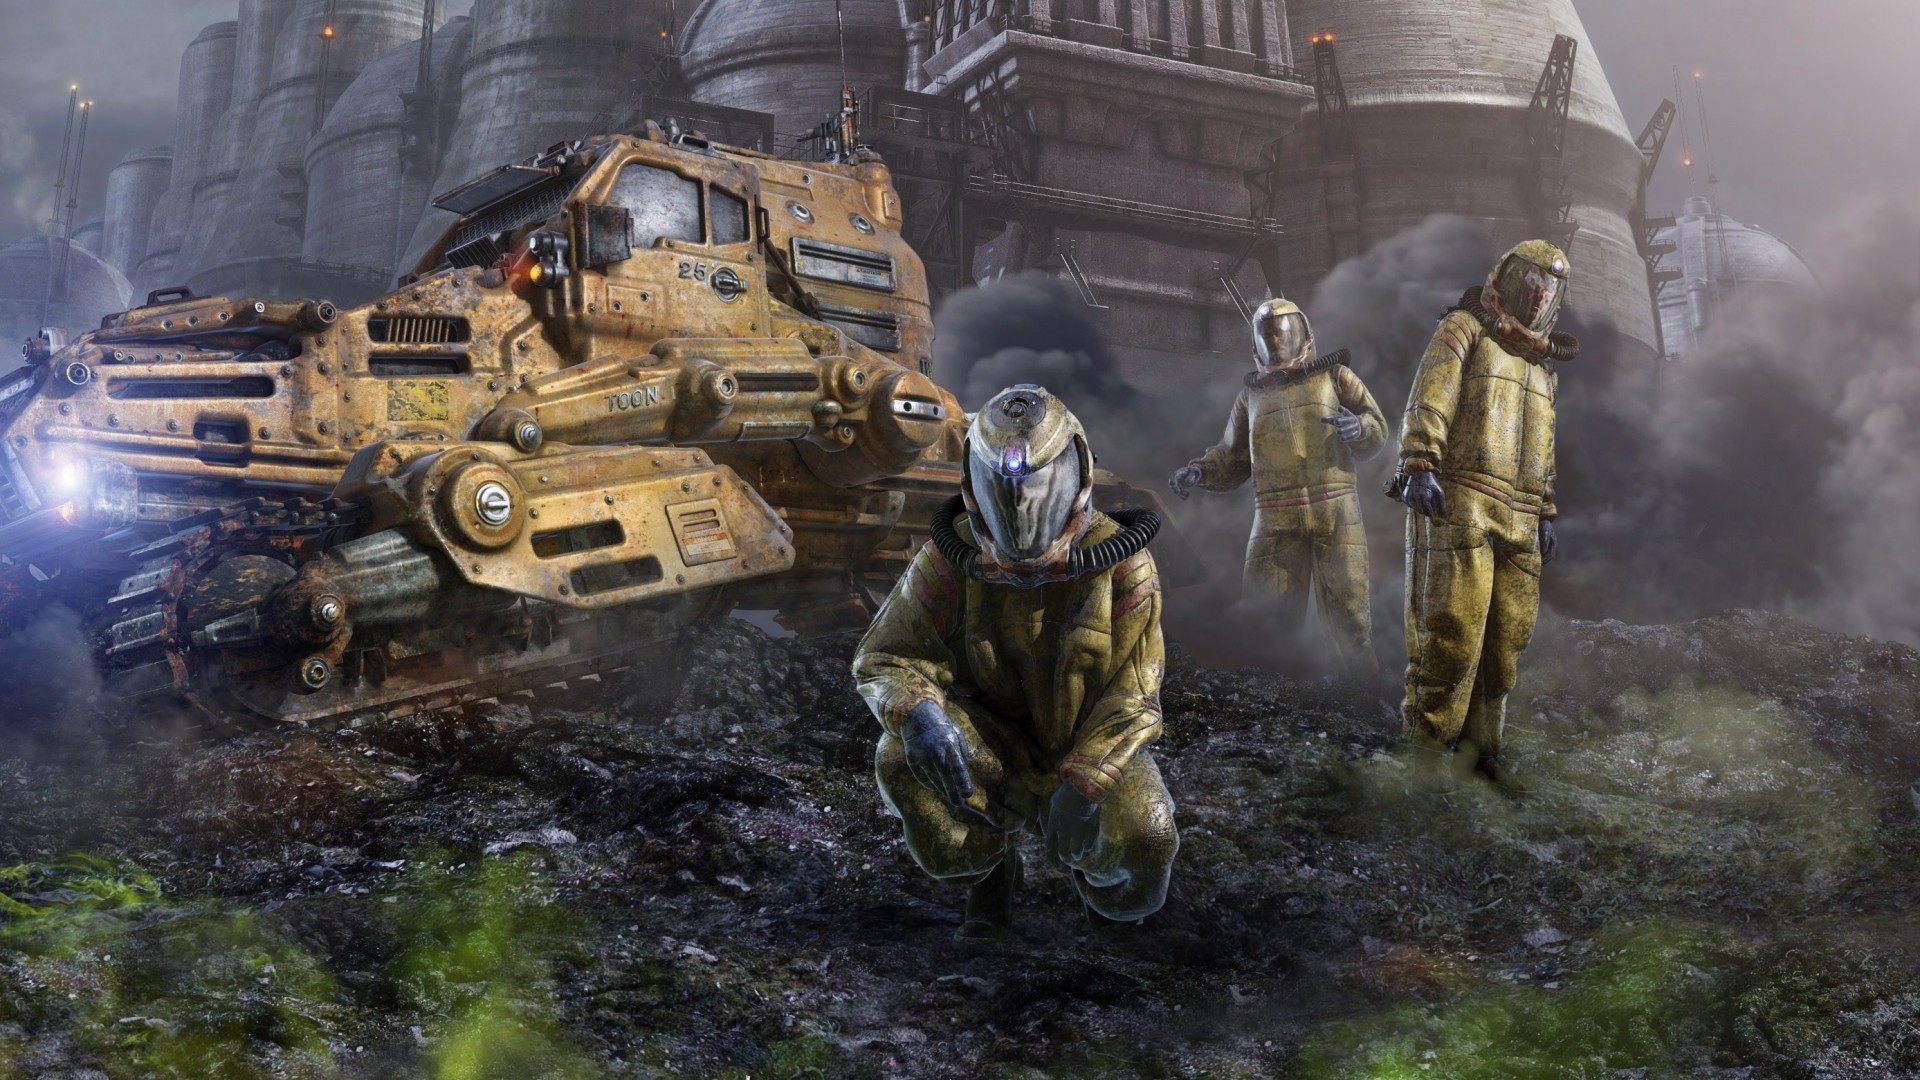 Download Now Full Hd Wallpaper Heavy Suv Plant Toxic Protective Suit Smoke 1920x1080